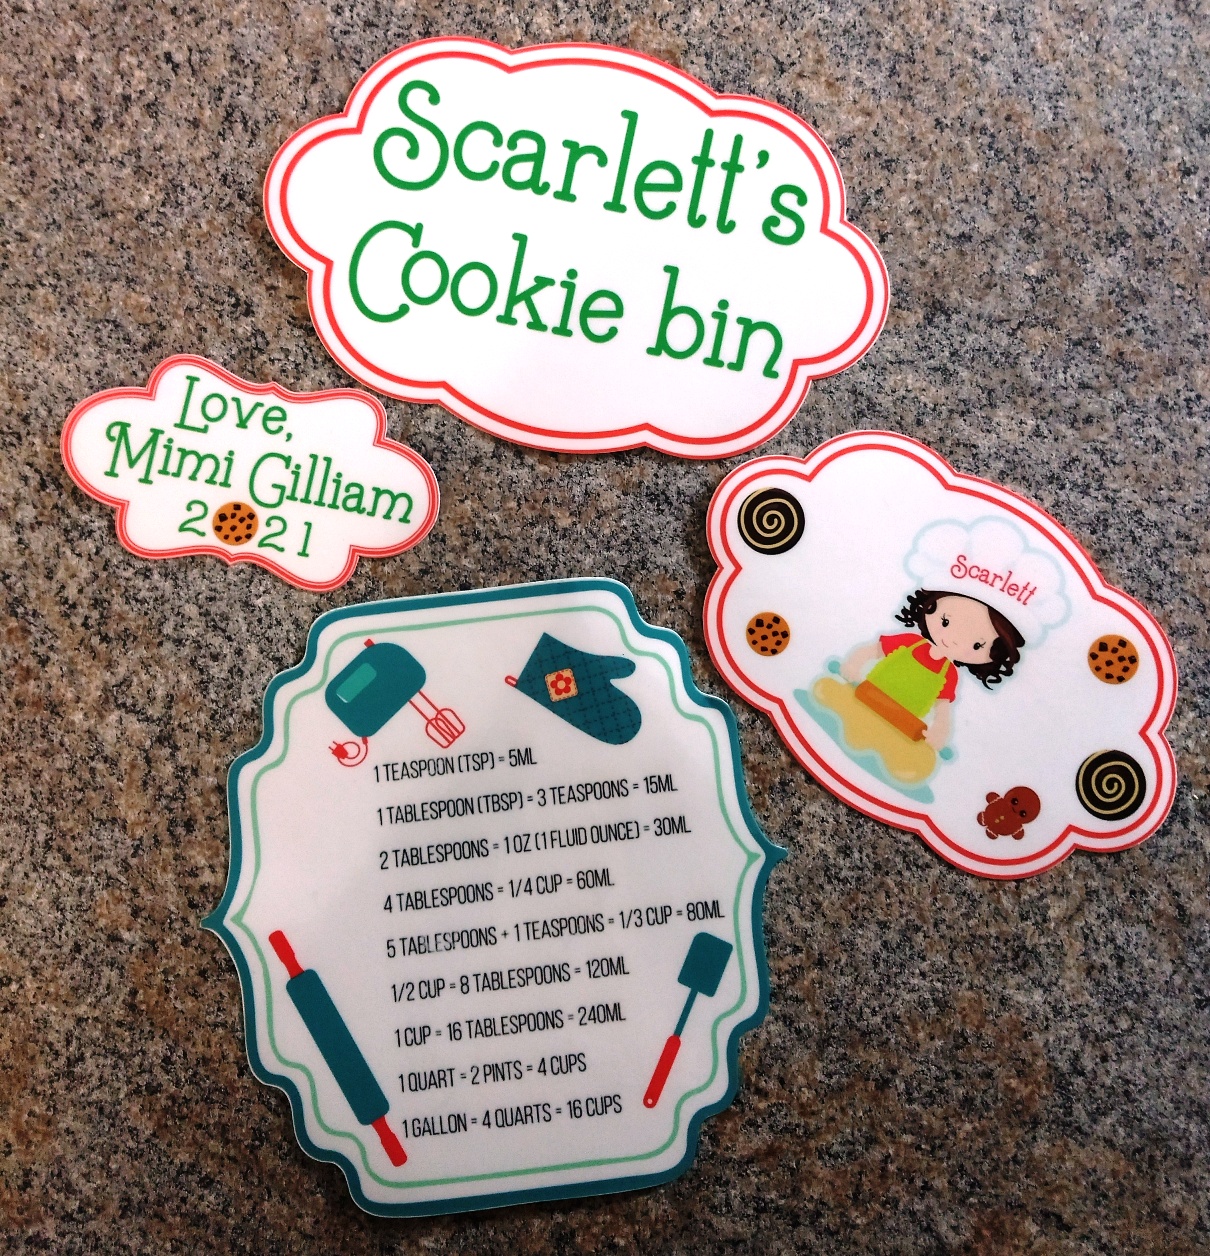 Scarlett's cookie bin made with sublimation printing